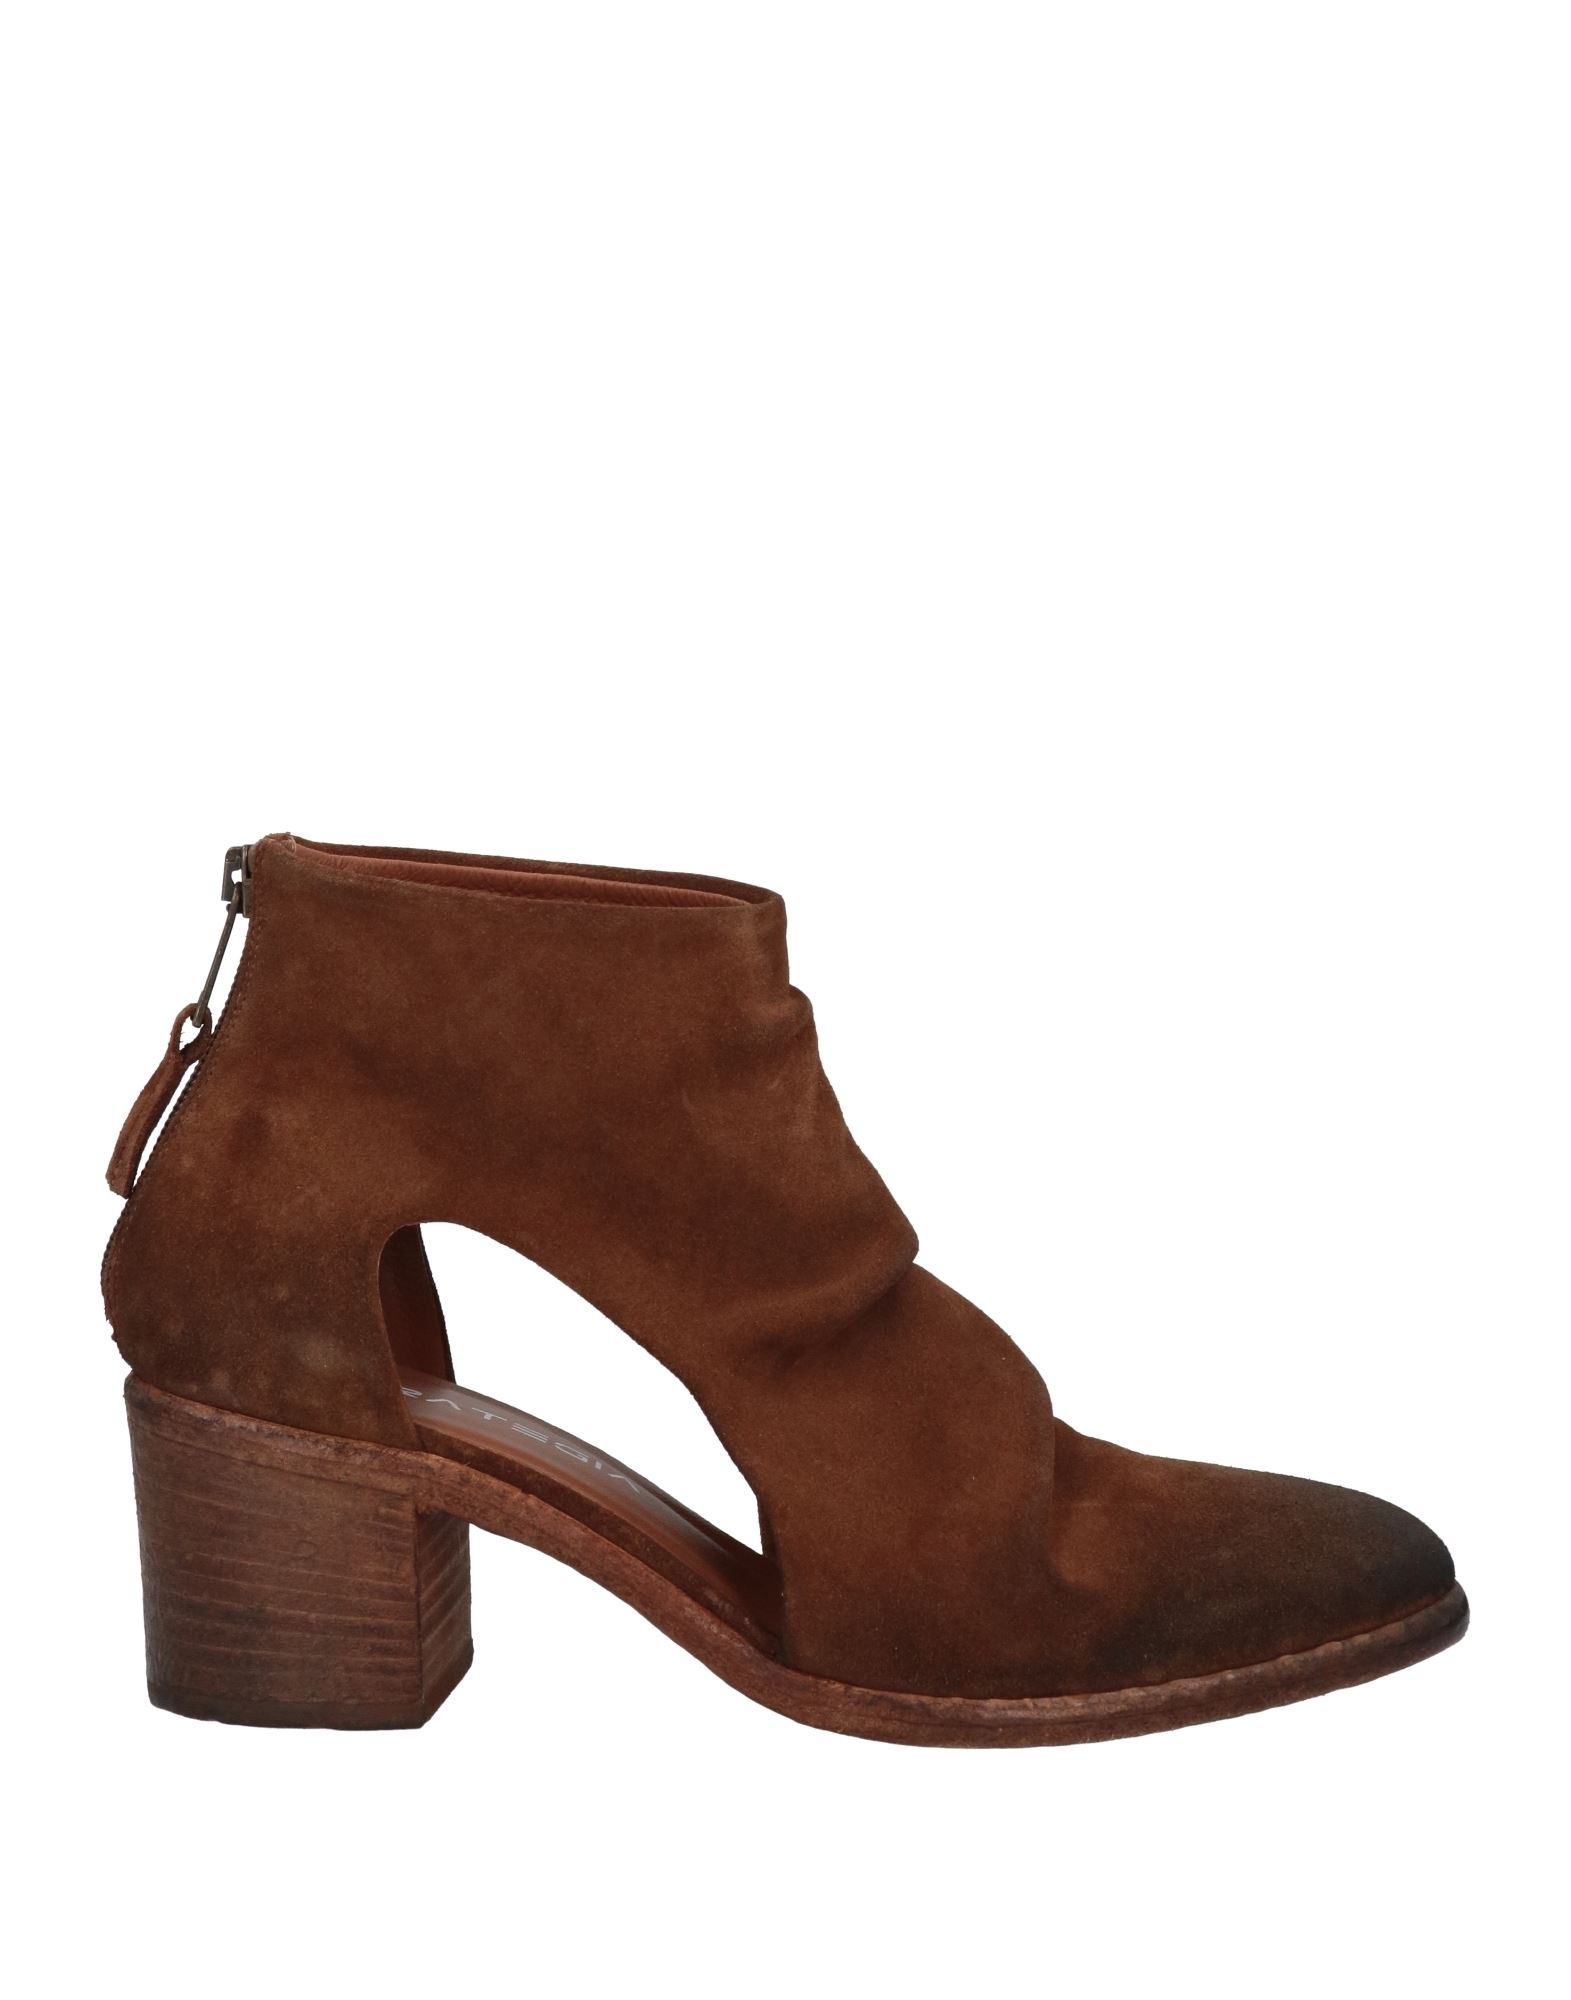 Strategia Ankle Boots In Beige